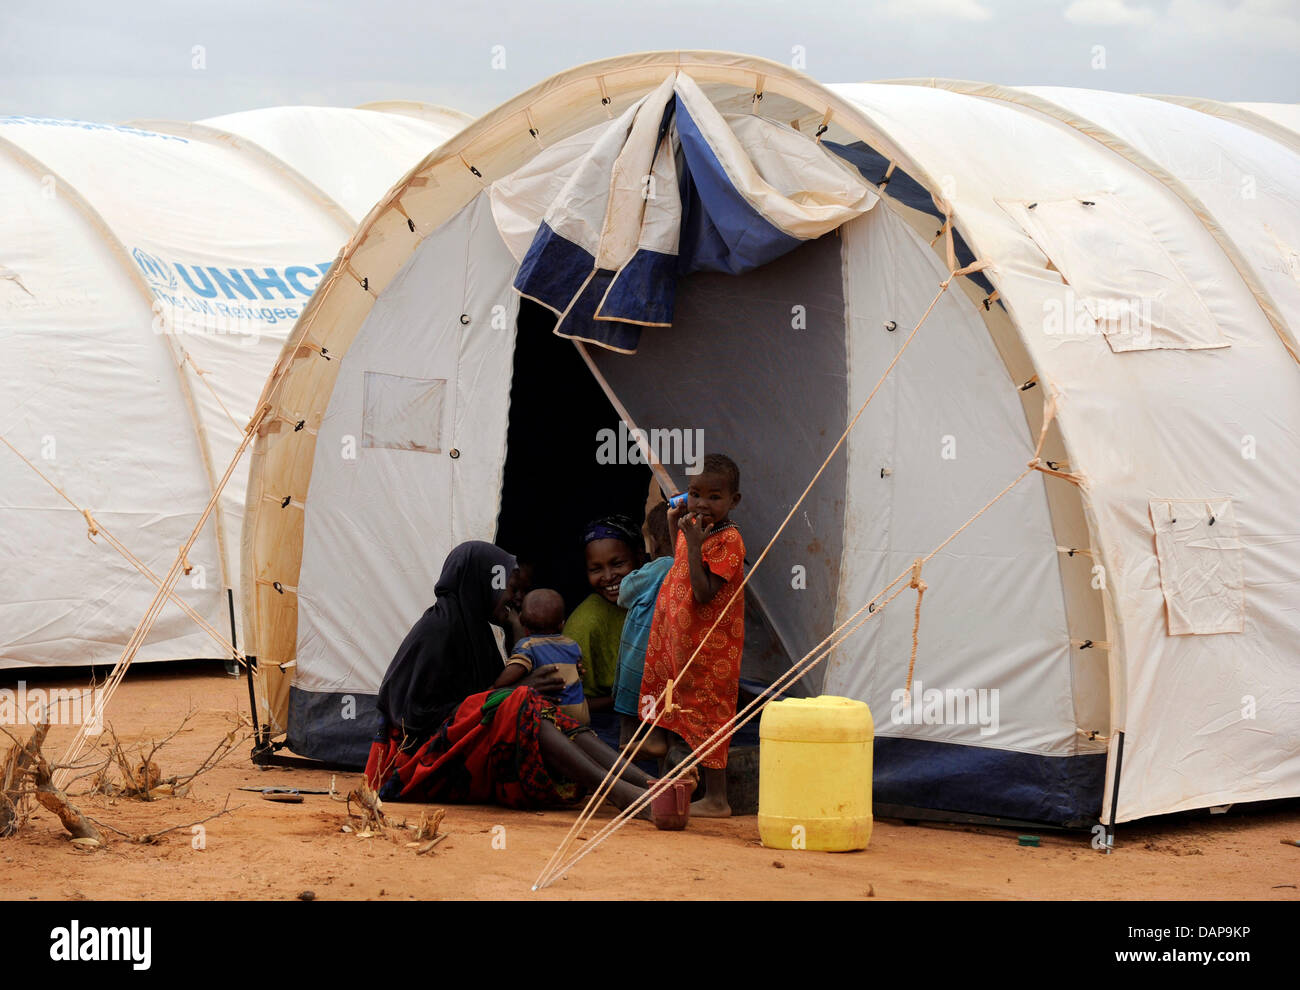 Refugees sit outside their tent at a refugee camp in Dadaab, Kenya 4 August 2011. Somalia and parts of Kenya have been struck by one of the worst draughts and famines in six decades, more than 350 000 refugees have found shelter in the worlds biggest refugee camp. Photo: Boris Roessler Stock Photo